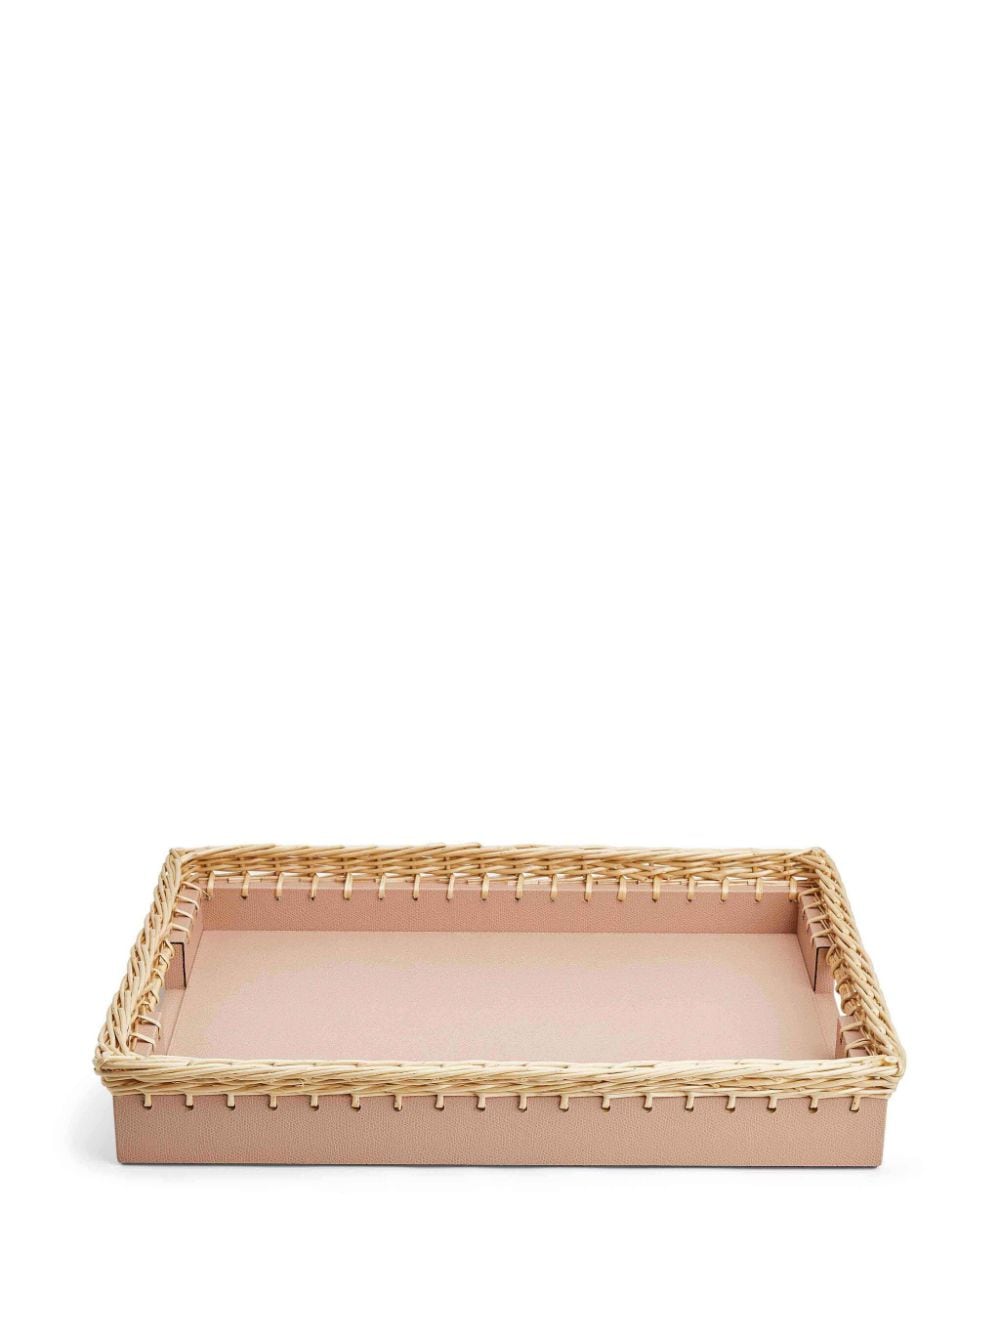 Shop Giobagnara Giverny Leather Tray In Pink